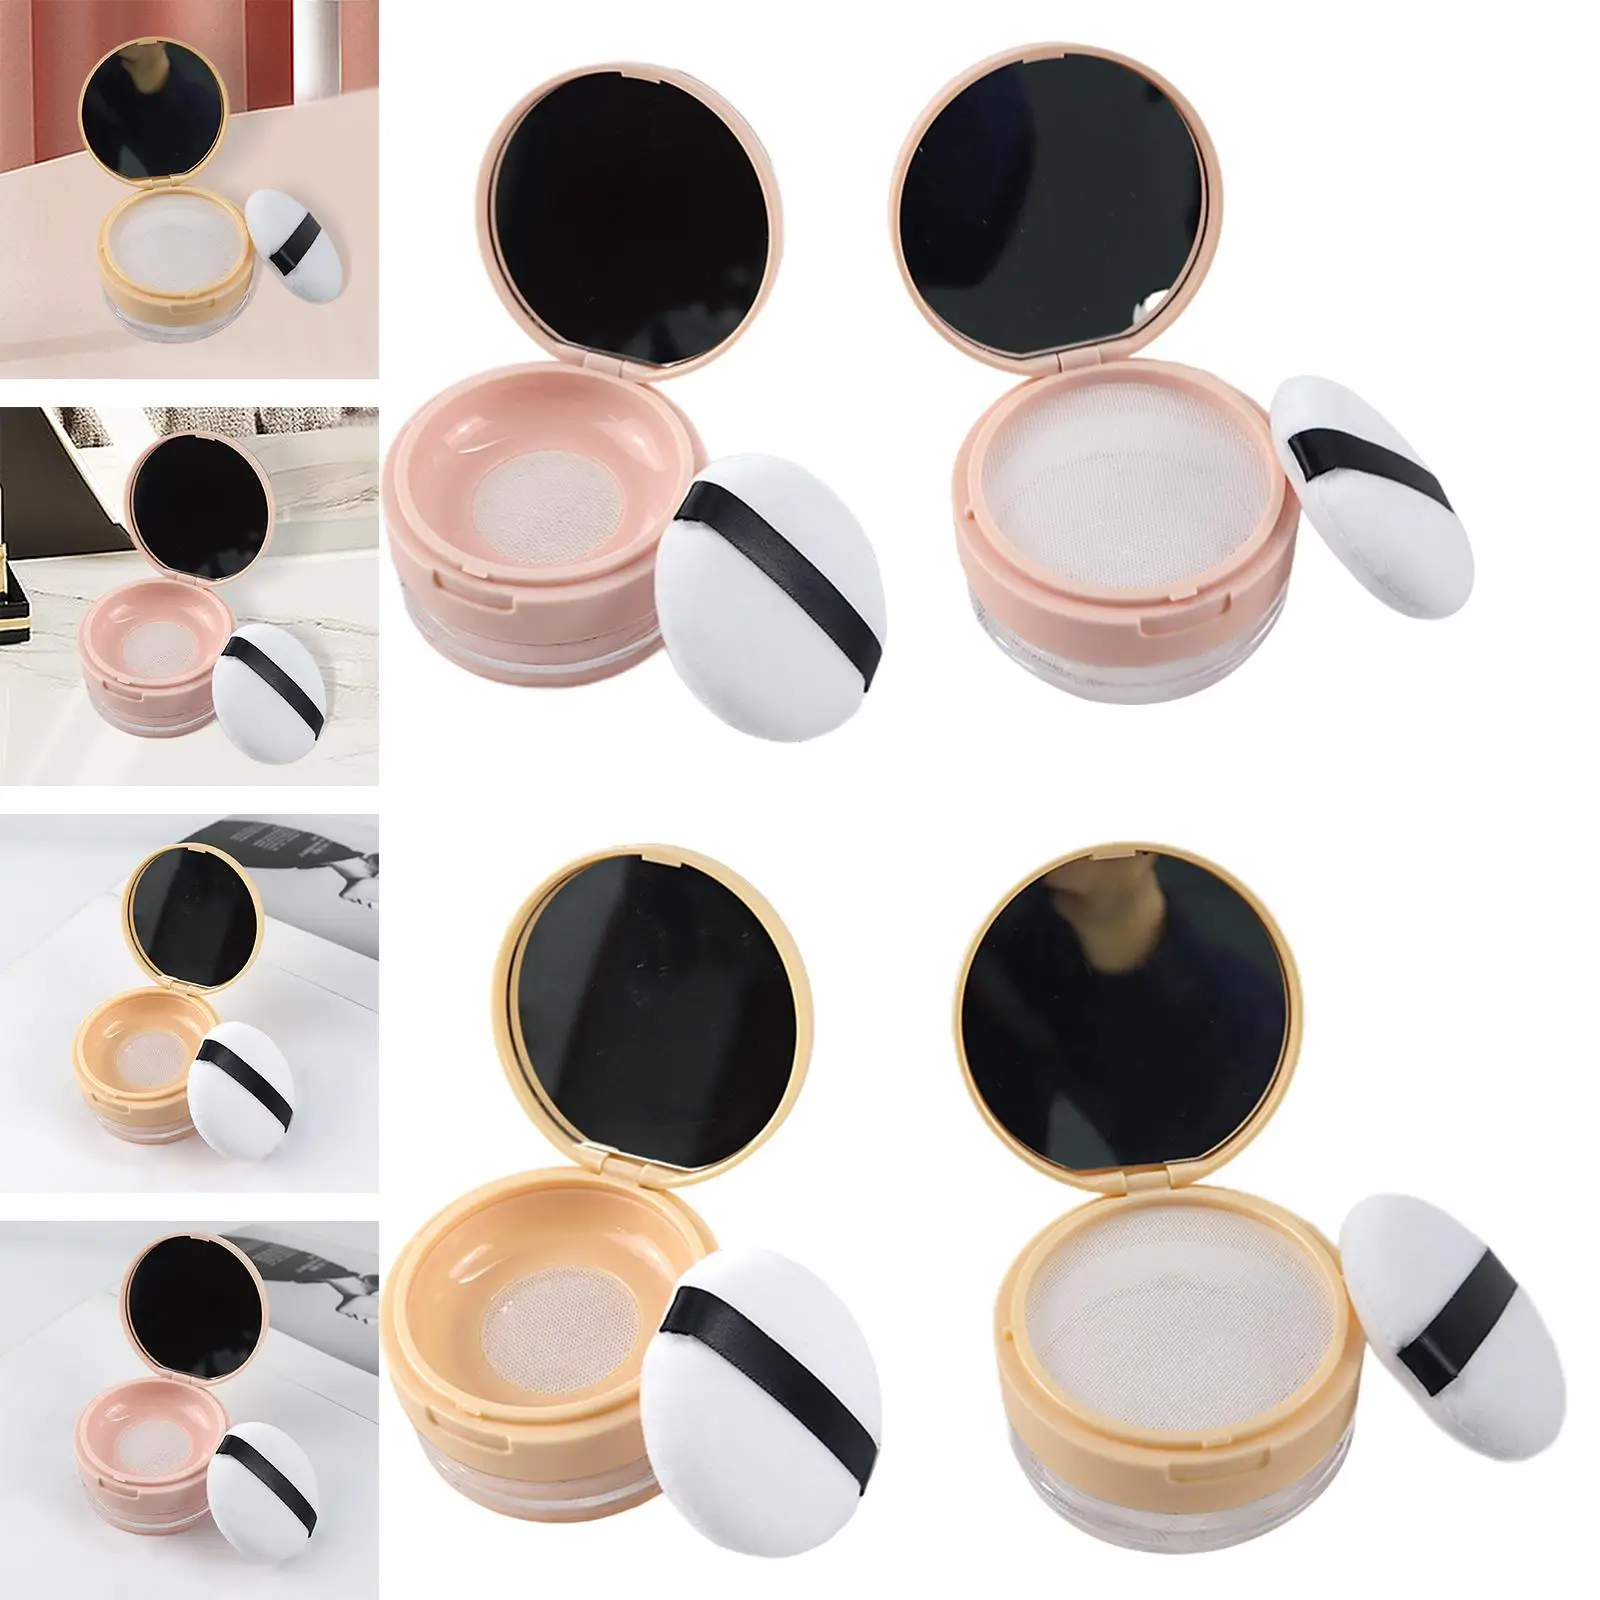 0.7 oz Loose Powder Container with Puff Reusable Compact Elasticated Net Sifter Portable Powder Box with Mirror for Blush Women